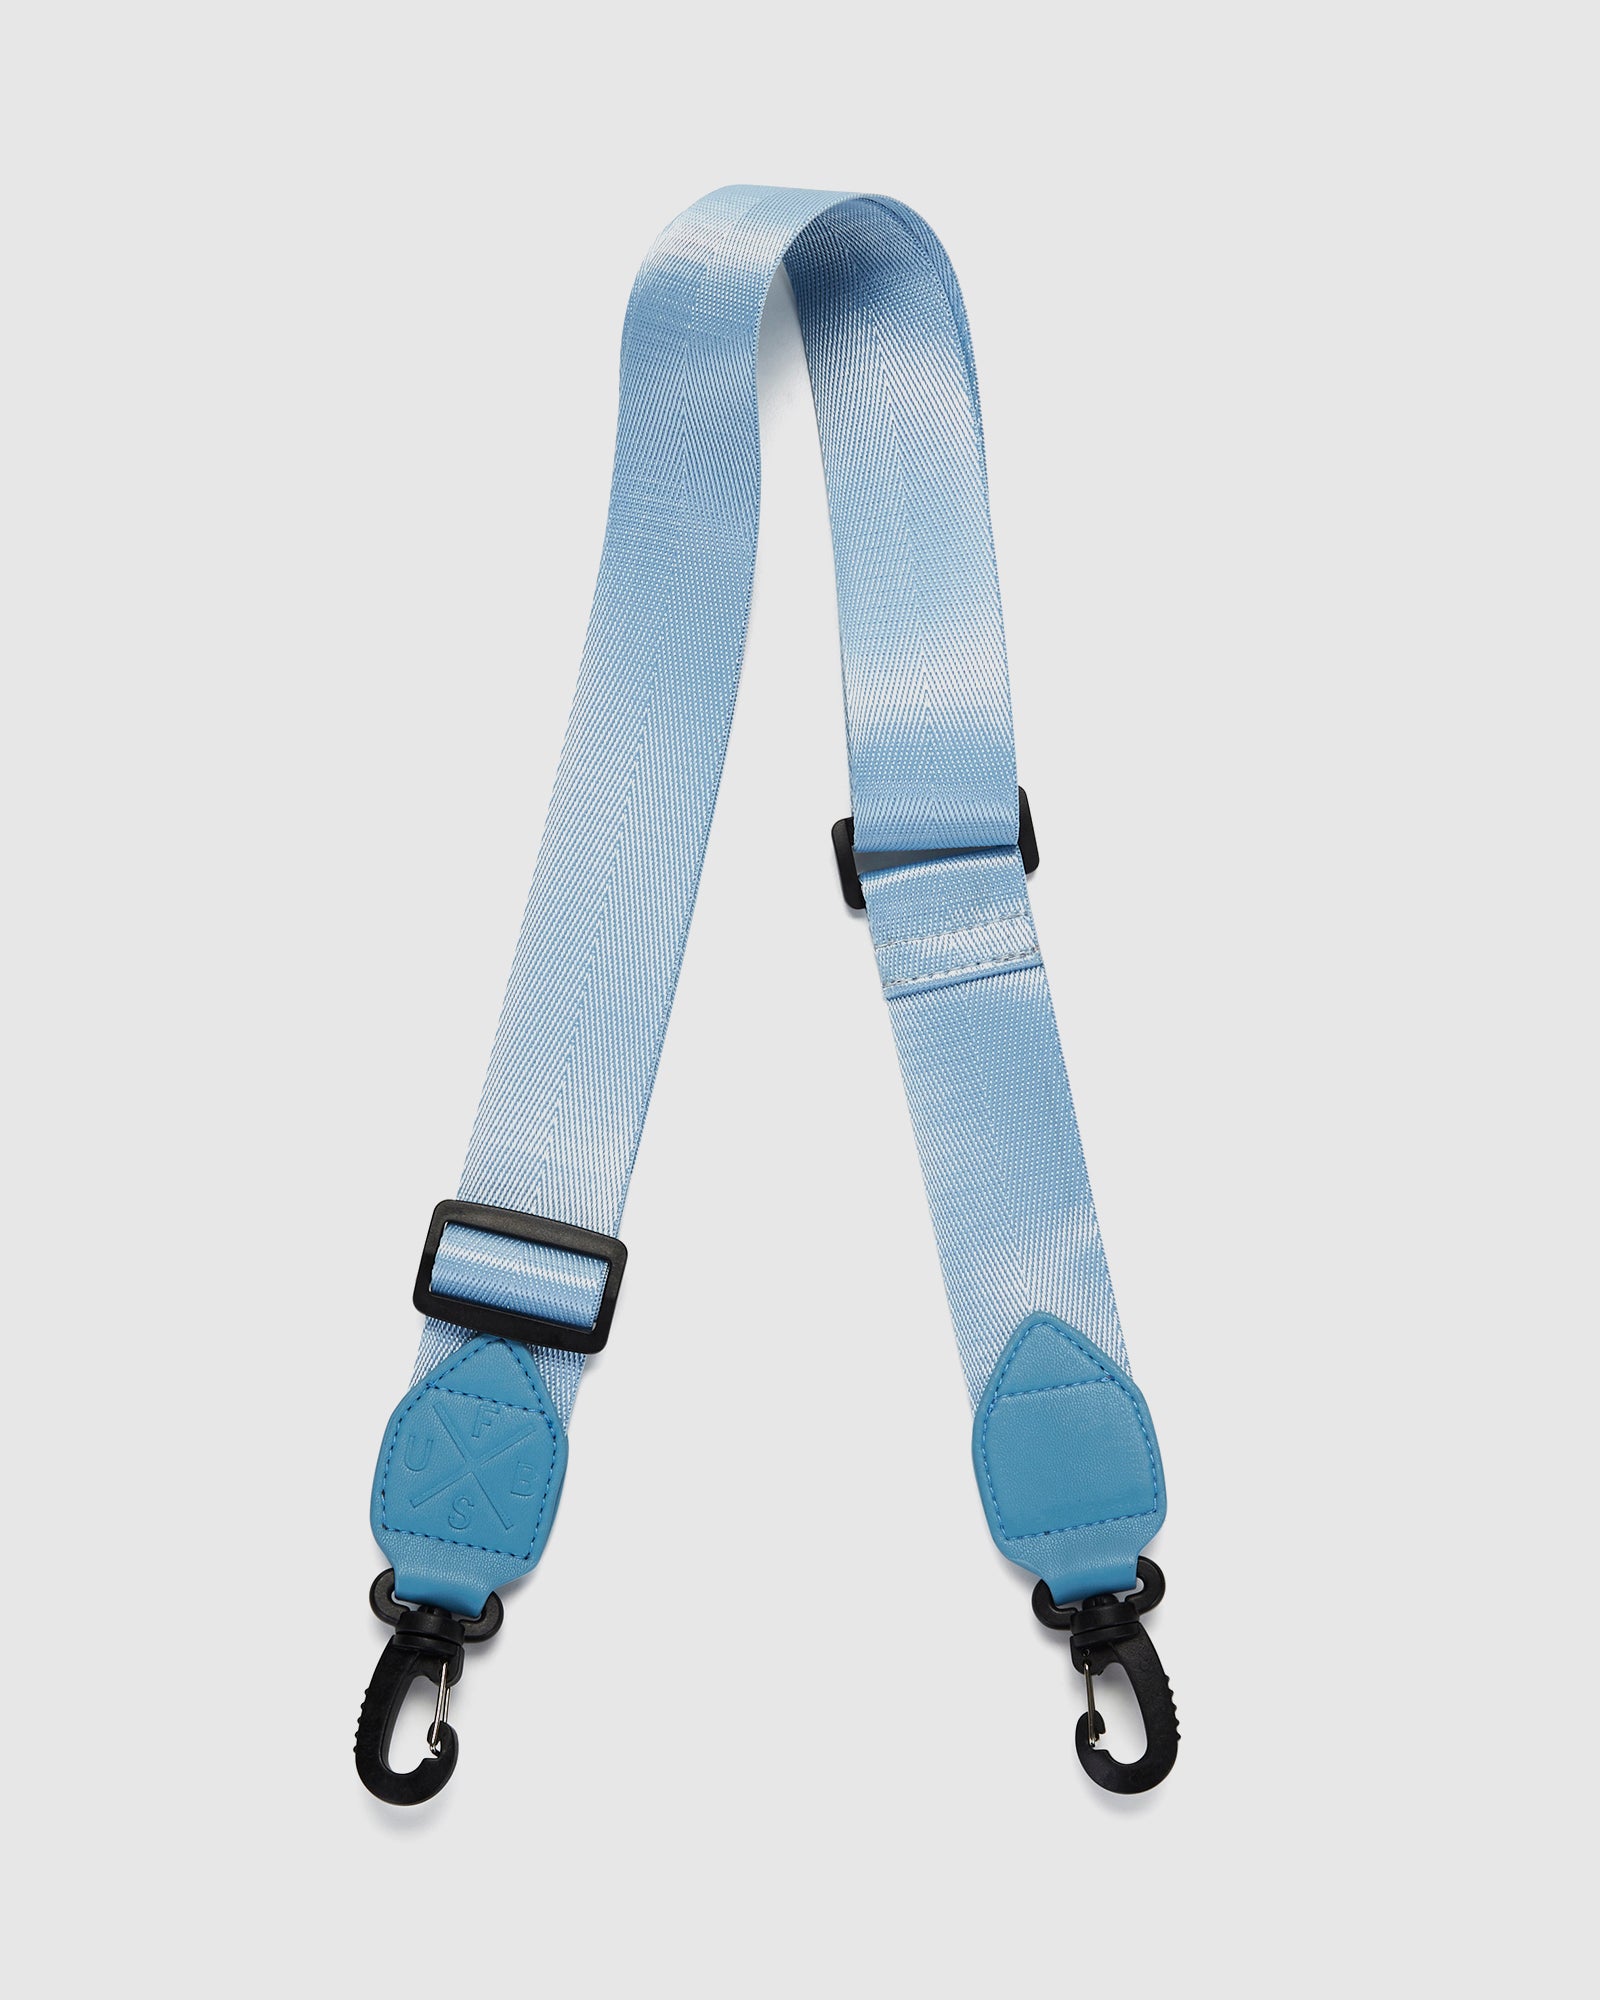 urban status x first base thick bag strap sky blue with black hardware